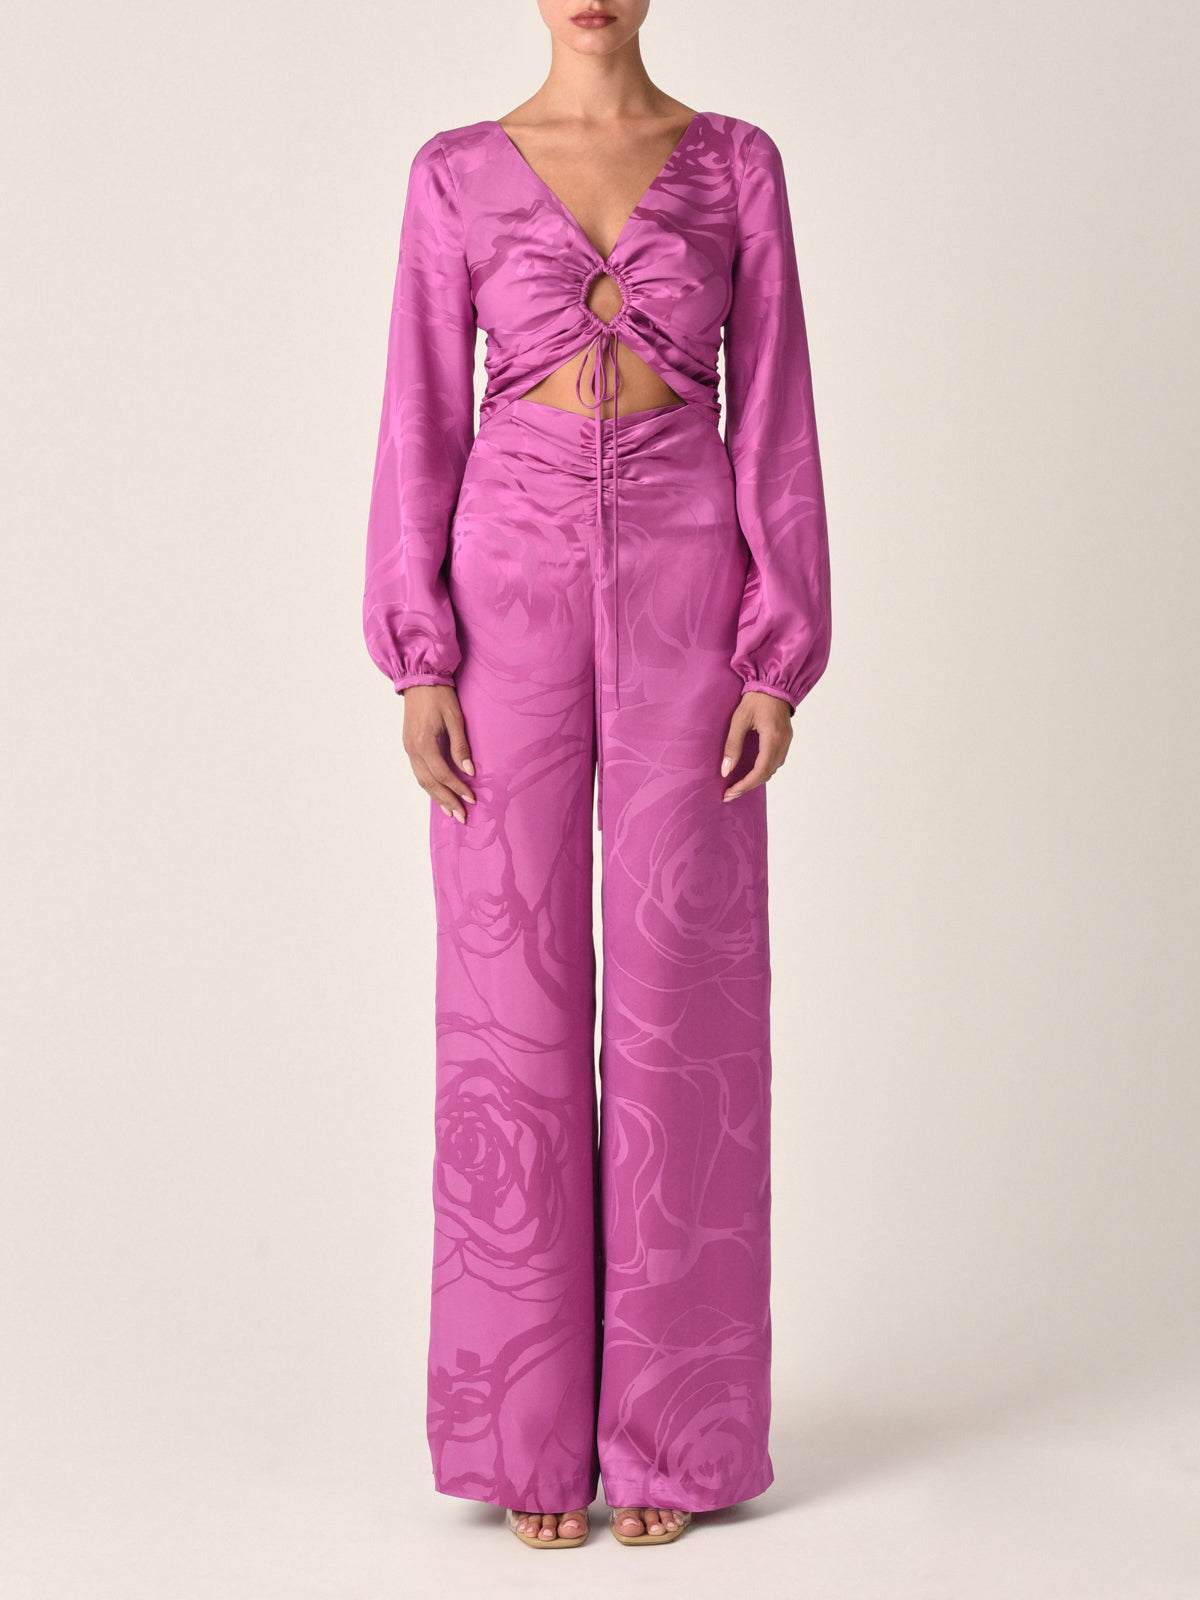 A magenta orchid jacquard, cropped, long-sleeved Odette blouse with a tie-front design and an abstract print, isolated on a white background.